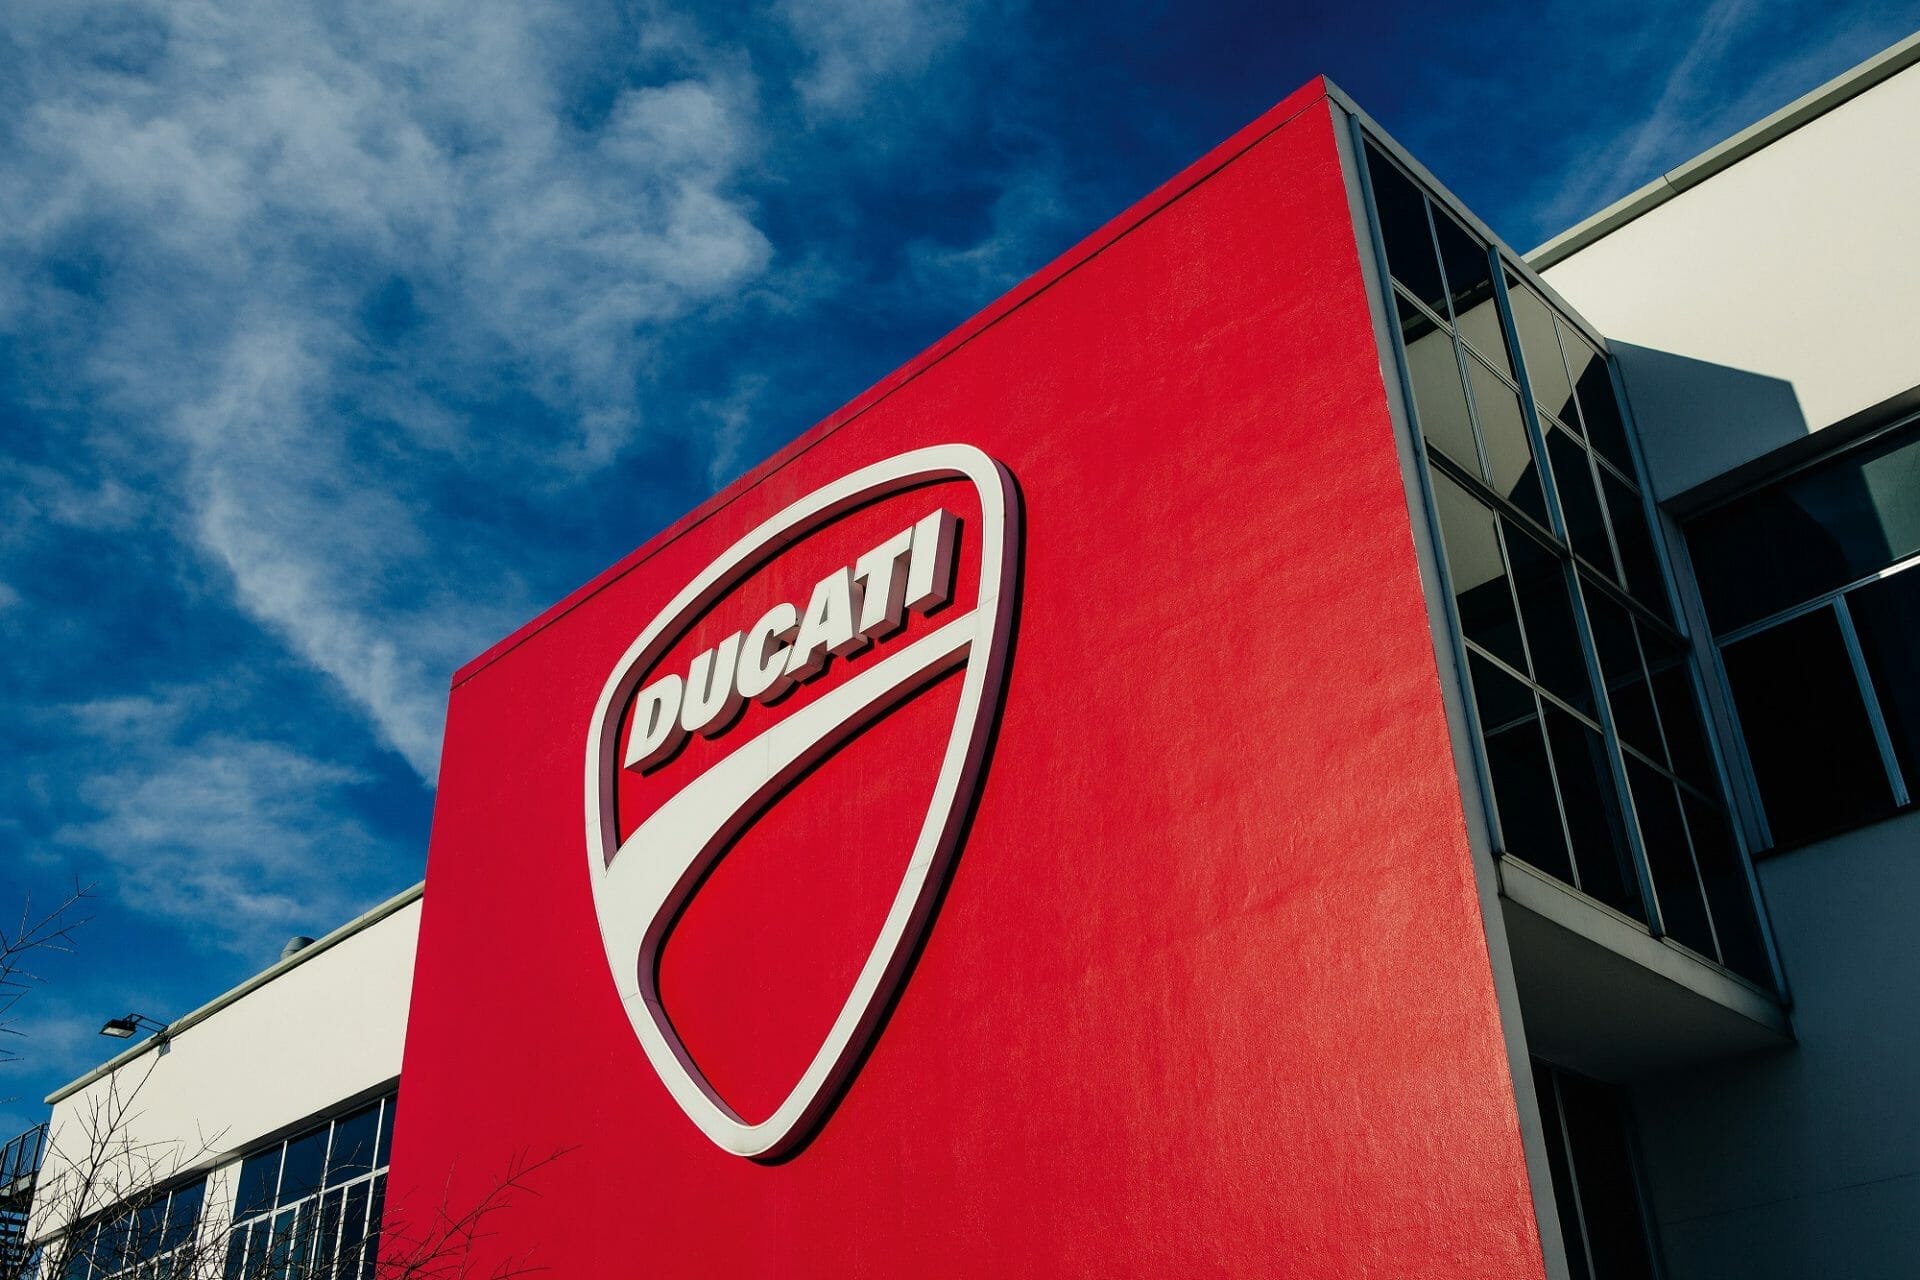 New launches coming - Ducati World Premiere Web Series 2022
- also in the MOTORCYCLES.NEWS APP